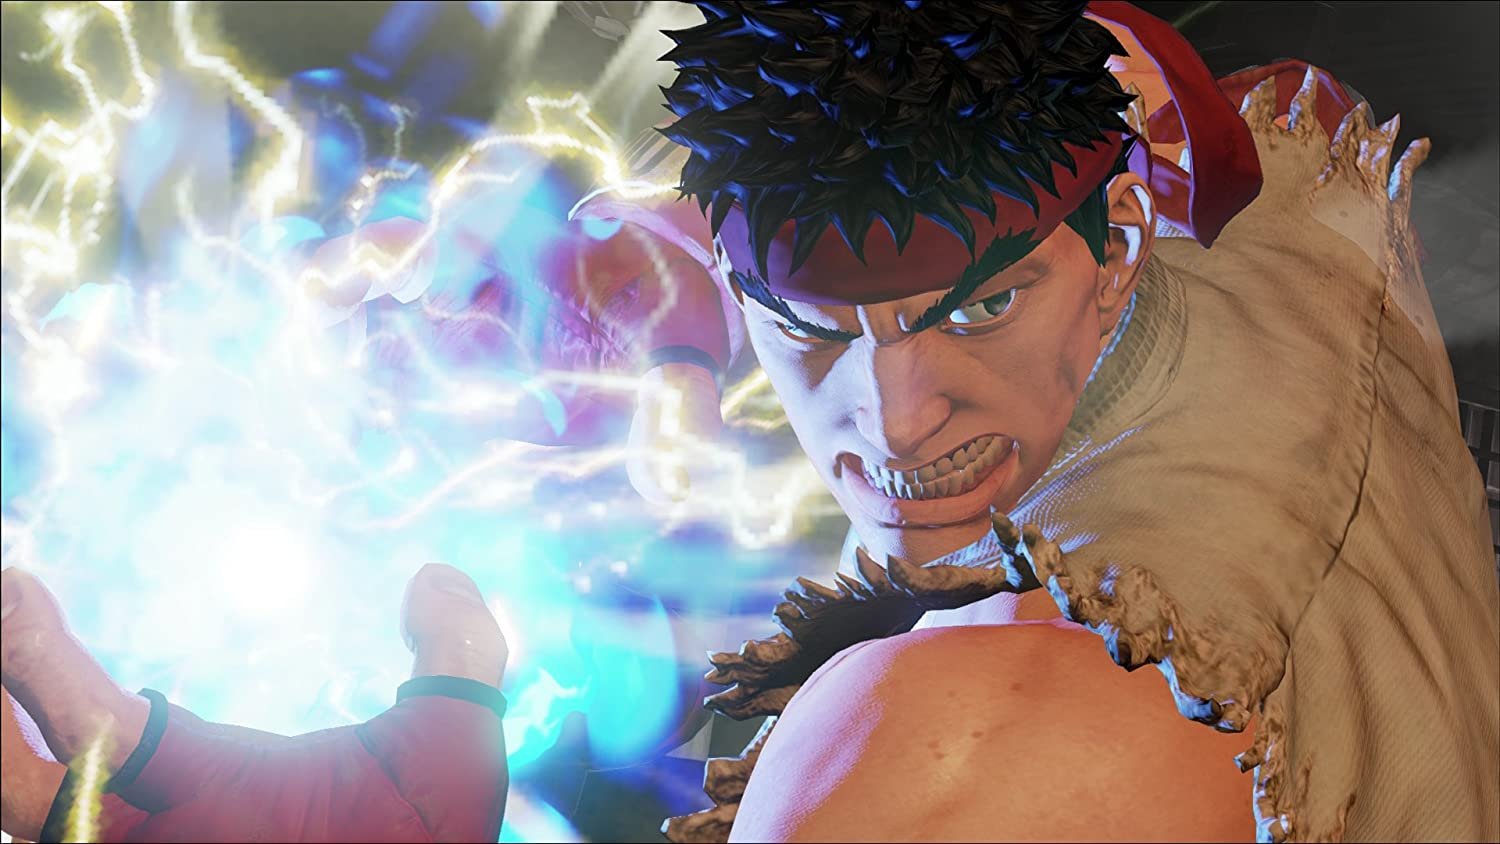 PS4 Juego Street Fighter 5 PlayStation 4